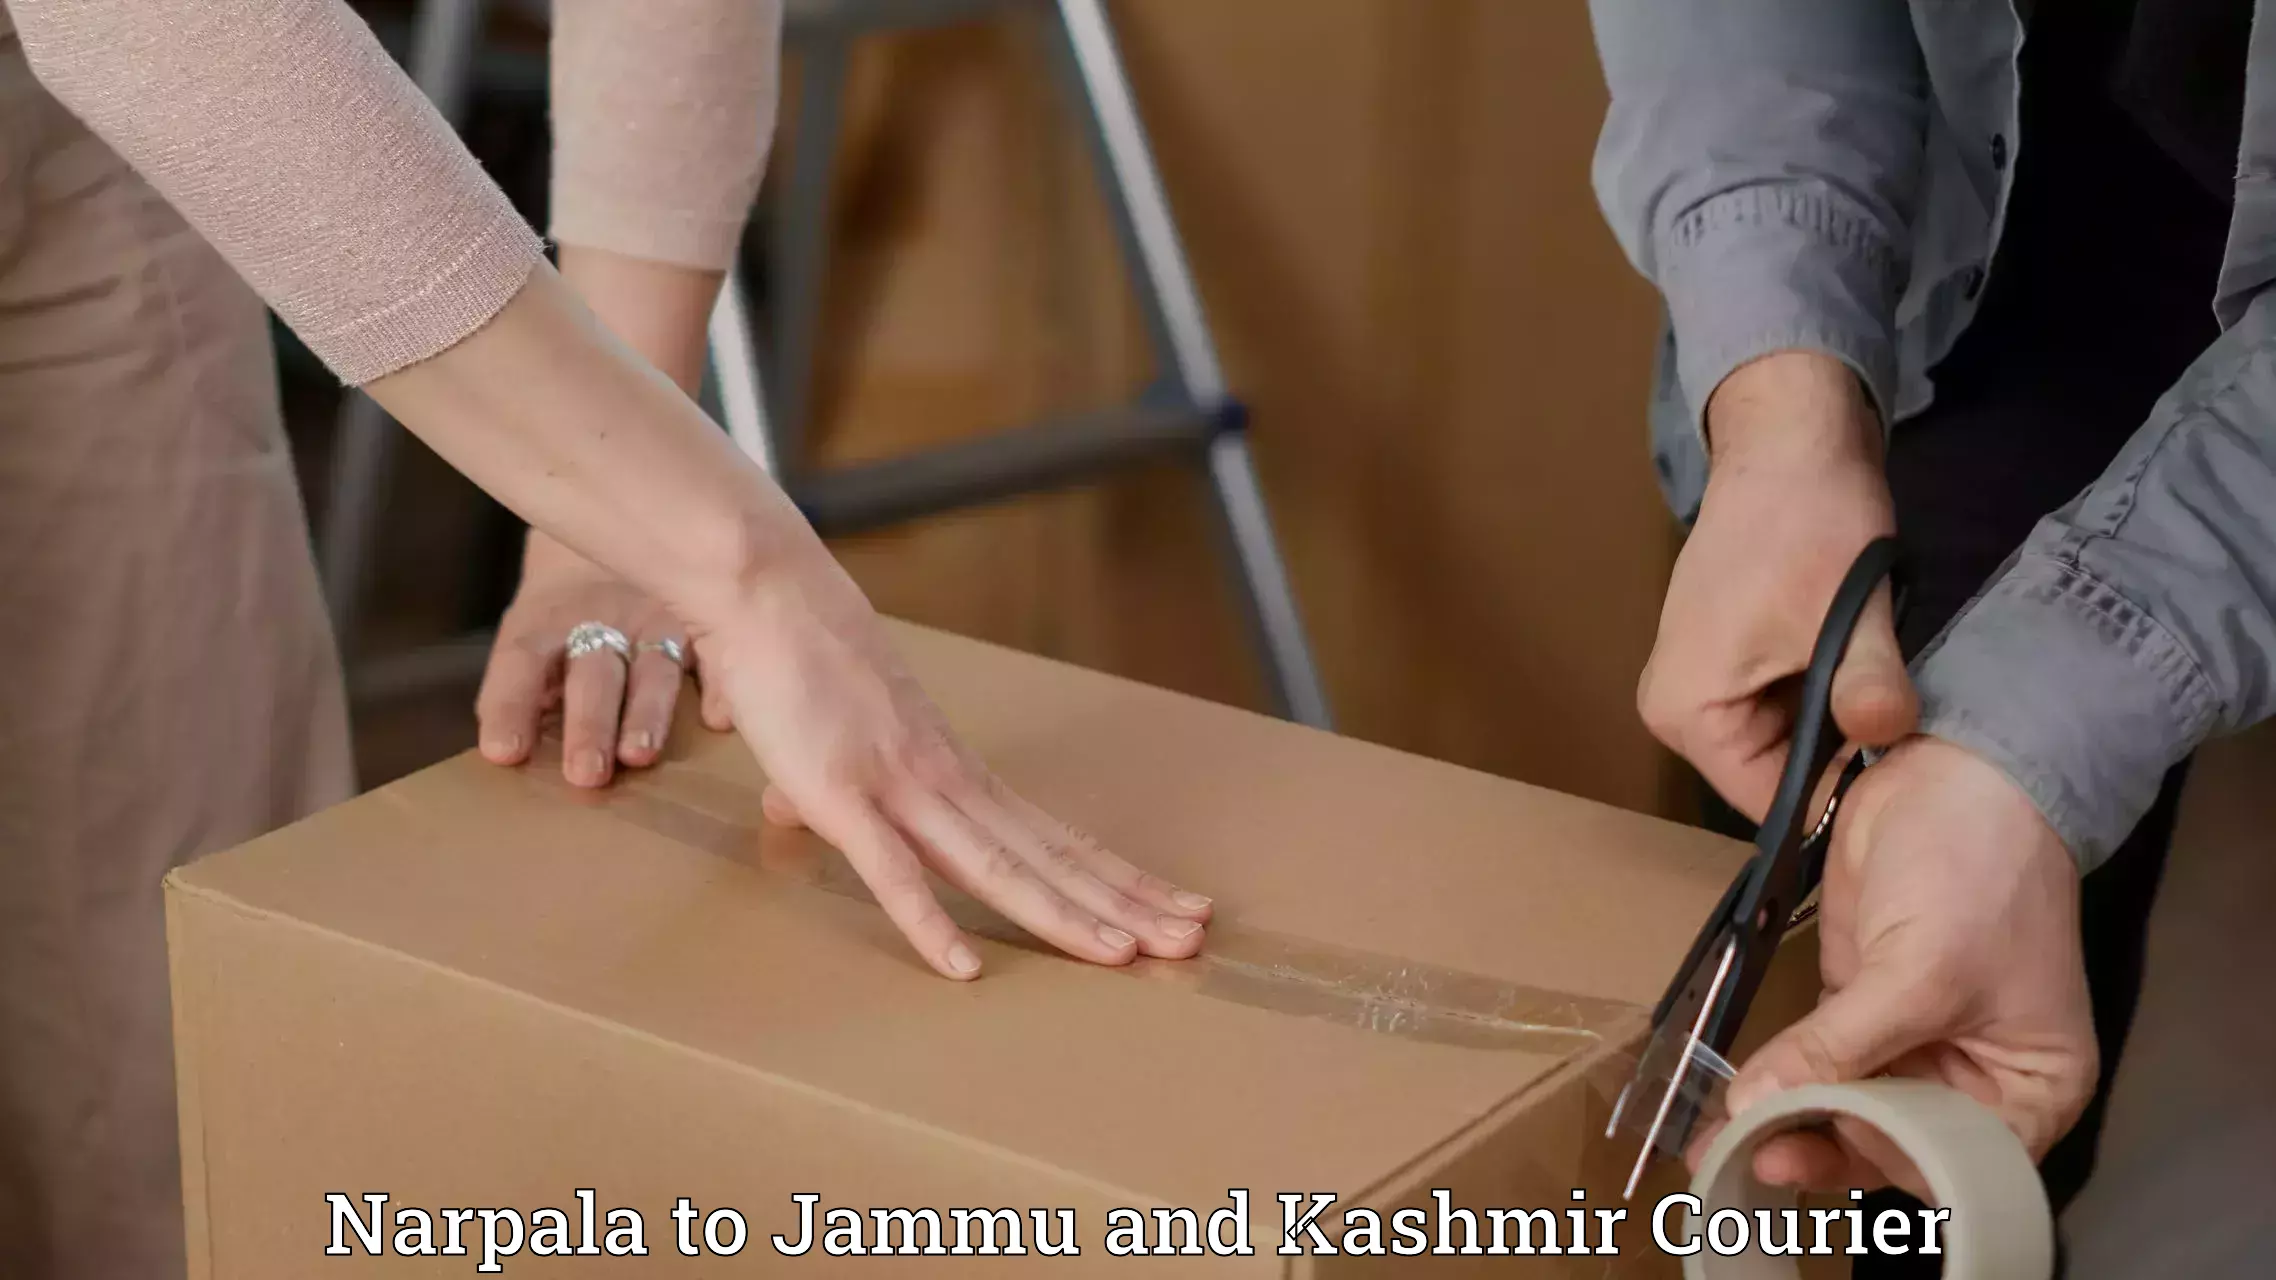 Courier services in Narpala to Anantnag